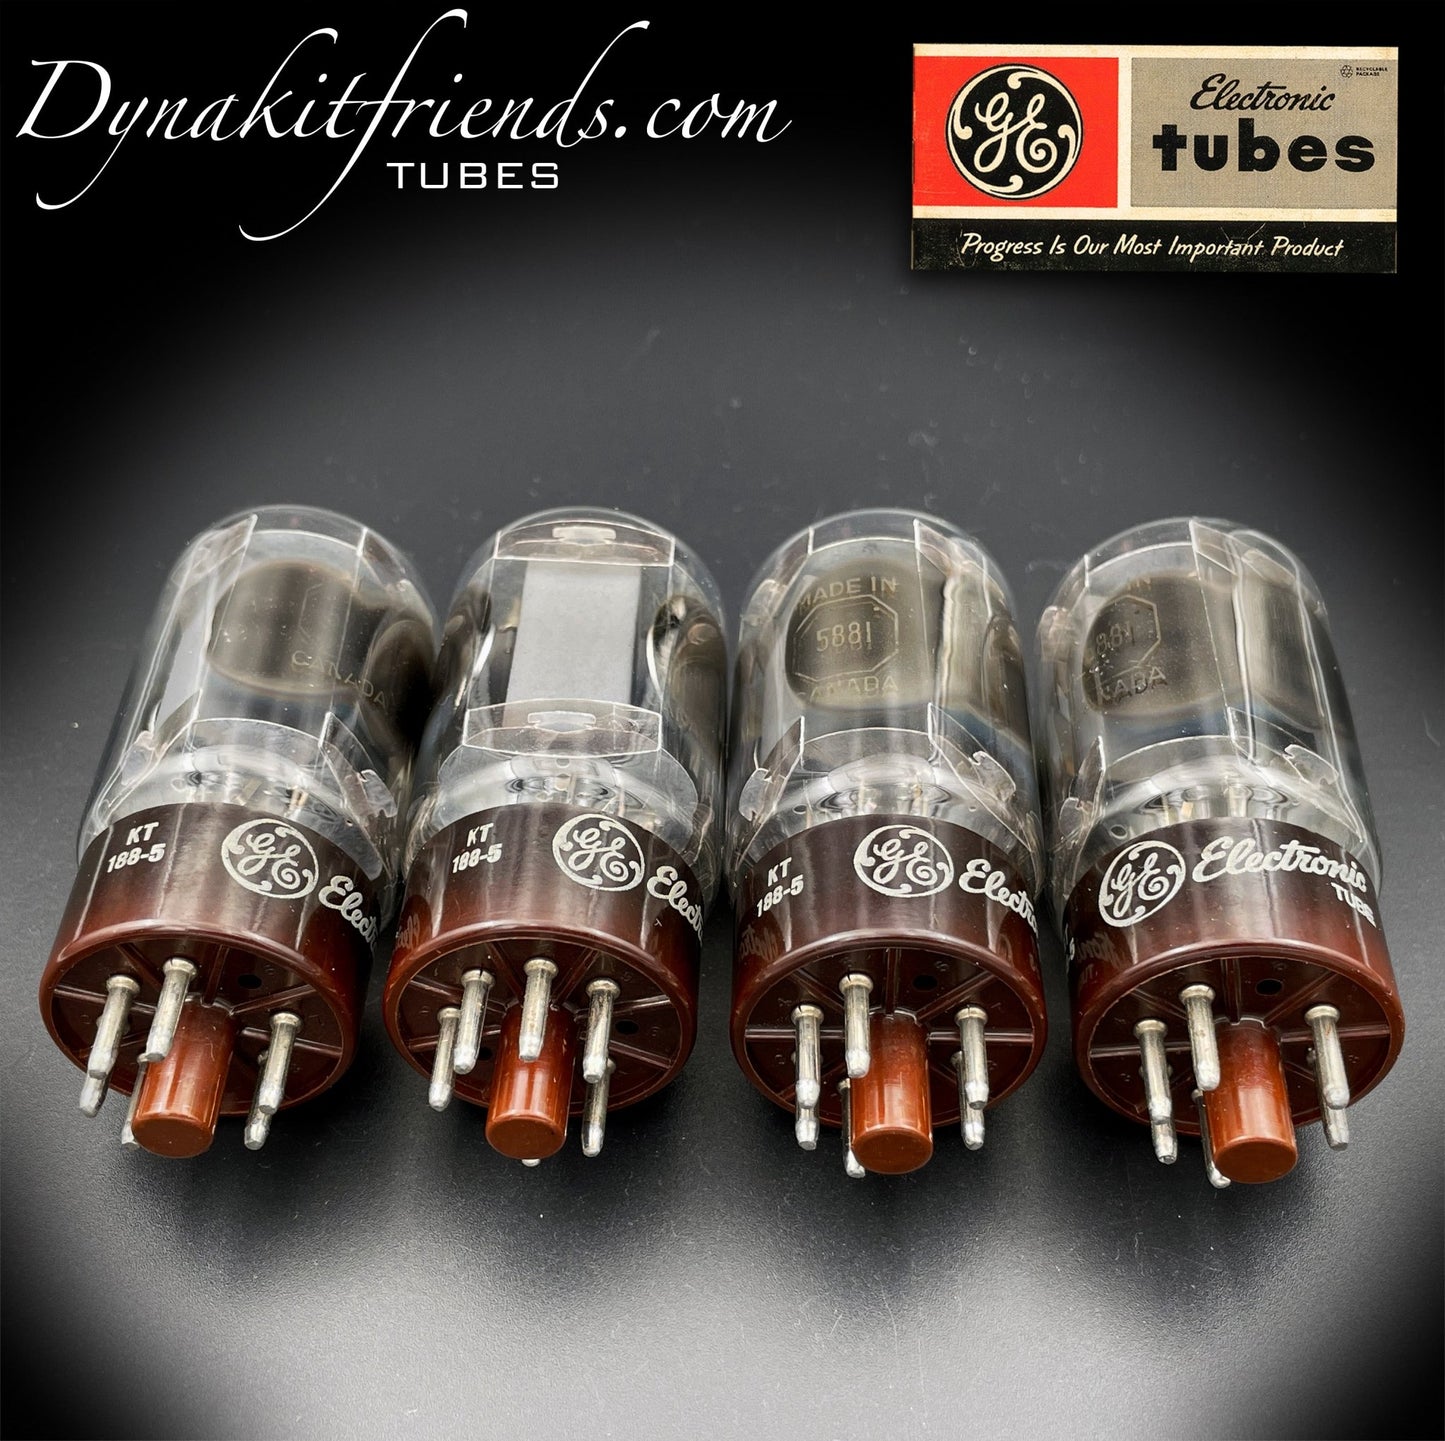 5881 ( 6L6WGB ) GE Brown Base Side OO Getter Matched Tubes Made in CANADA @ TEST NOS - Vacuum Tubes Treasures